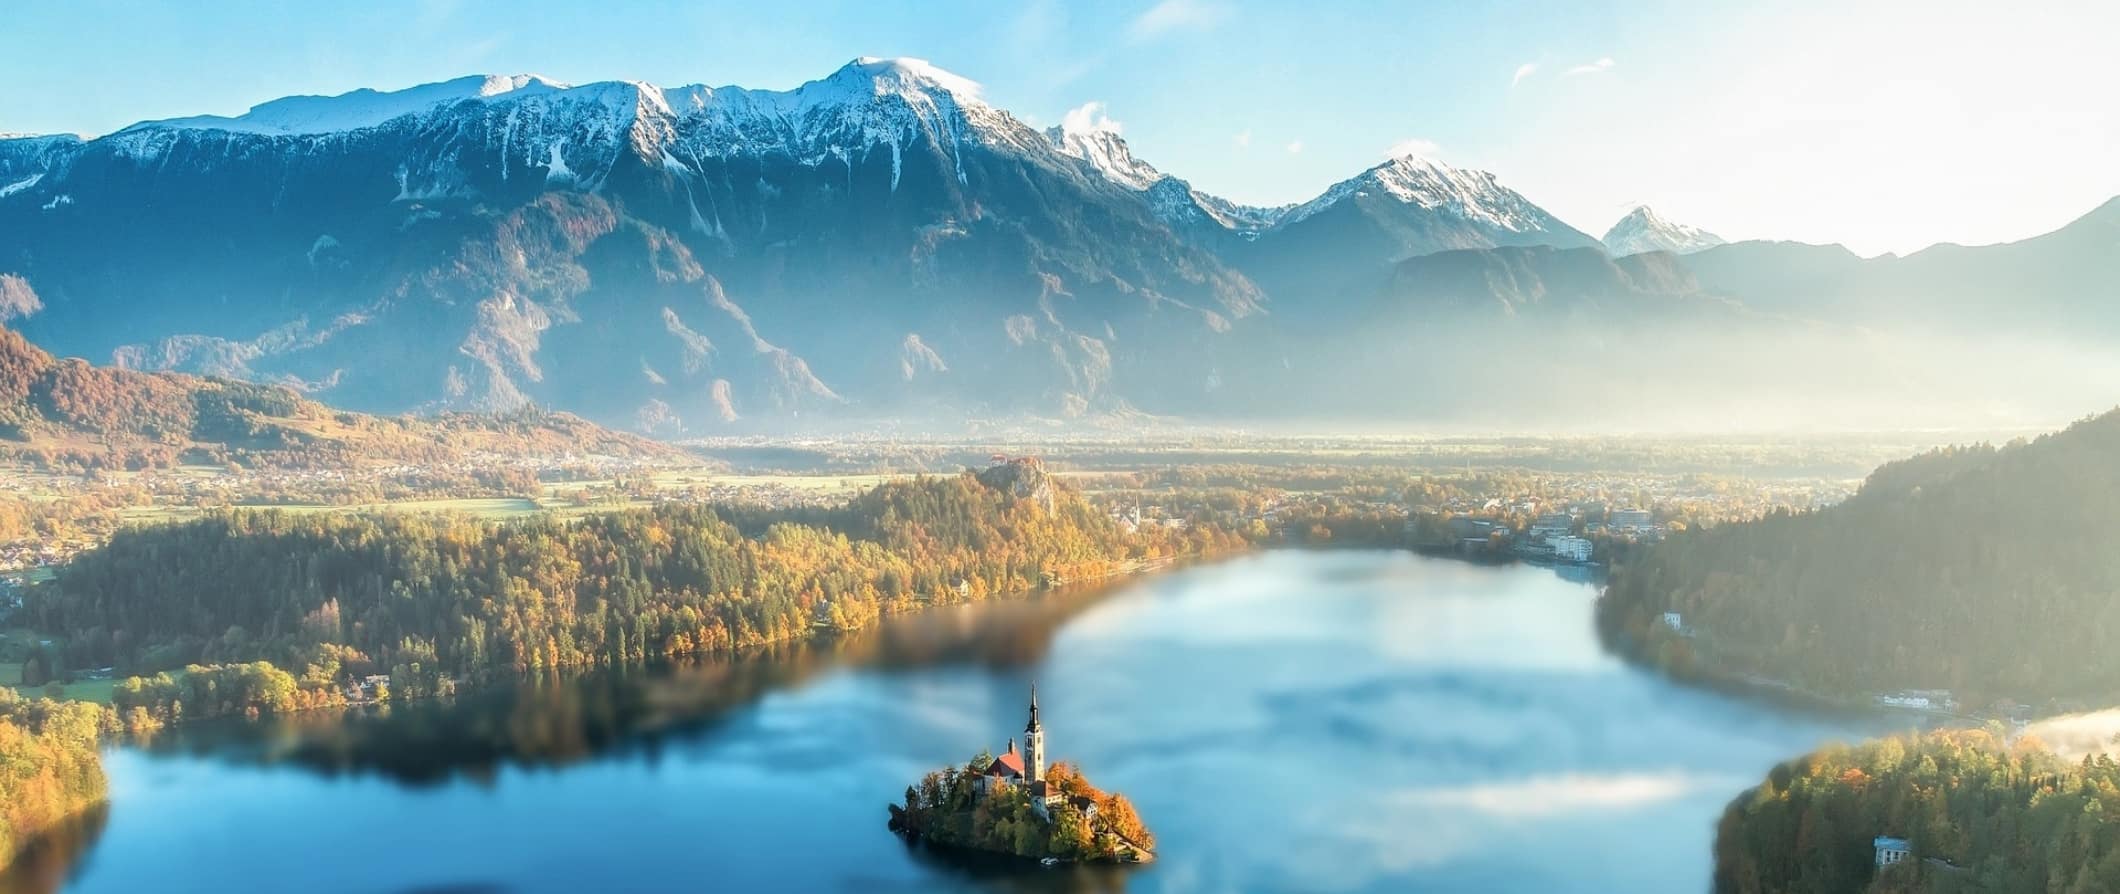 The mountains and lake surrounding the iconic and famous Bled Island in Slovenia